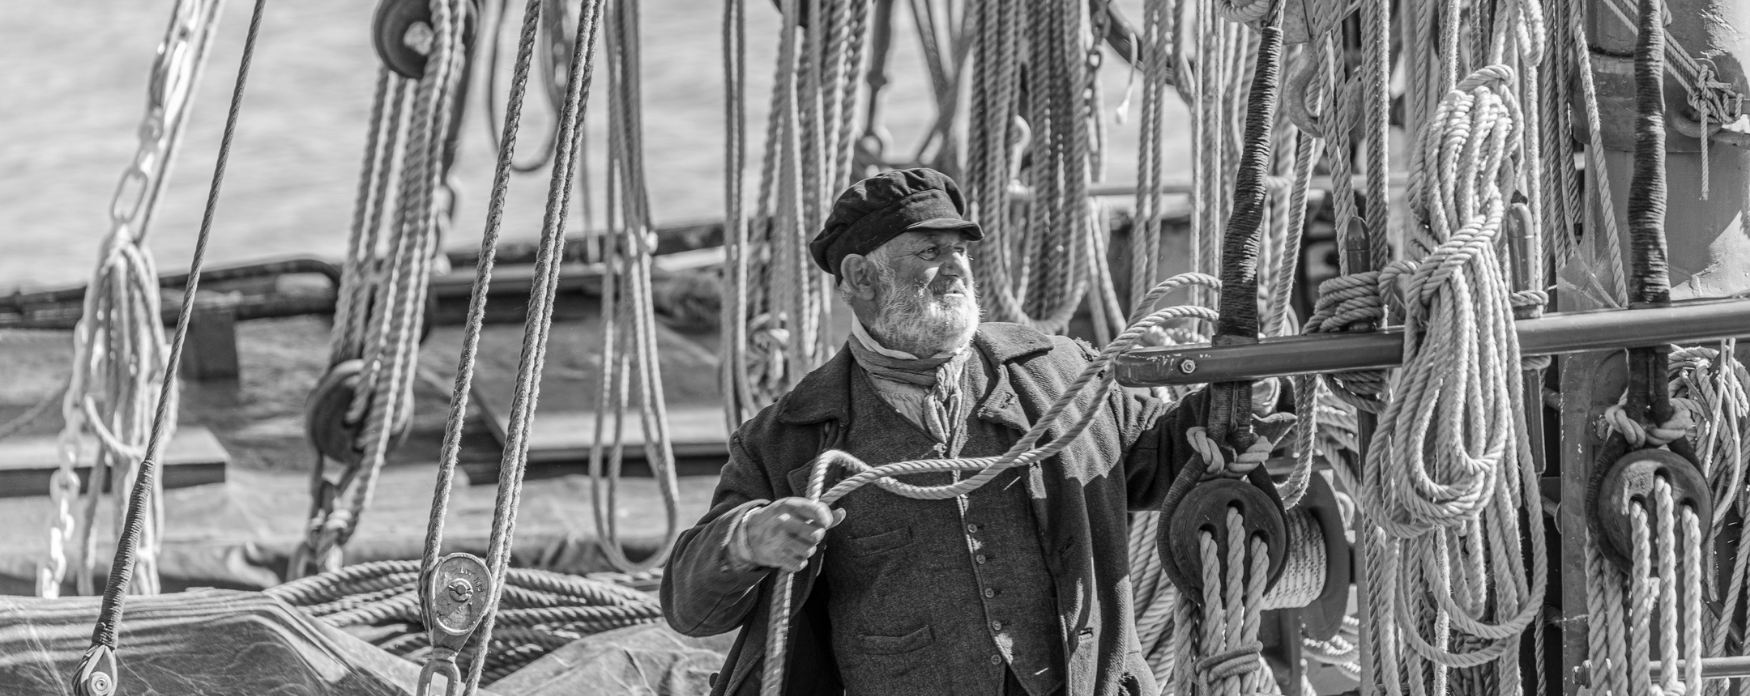 Hythe Quay transformed to Victorian era for film The Essex Serpent